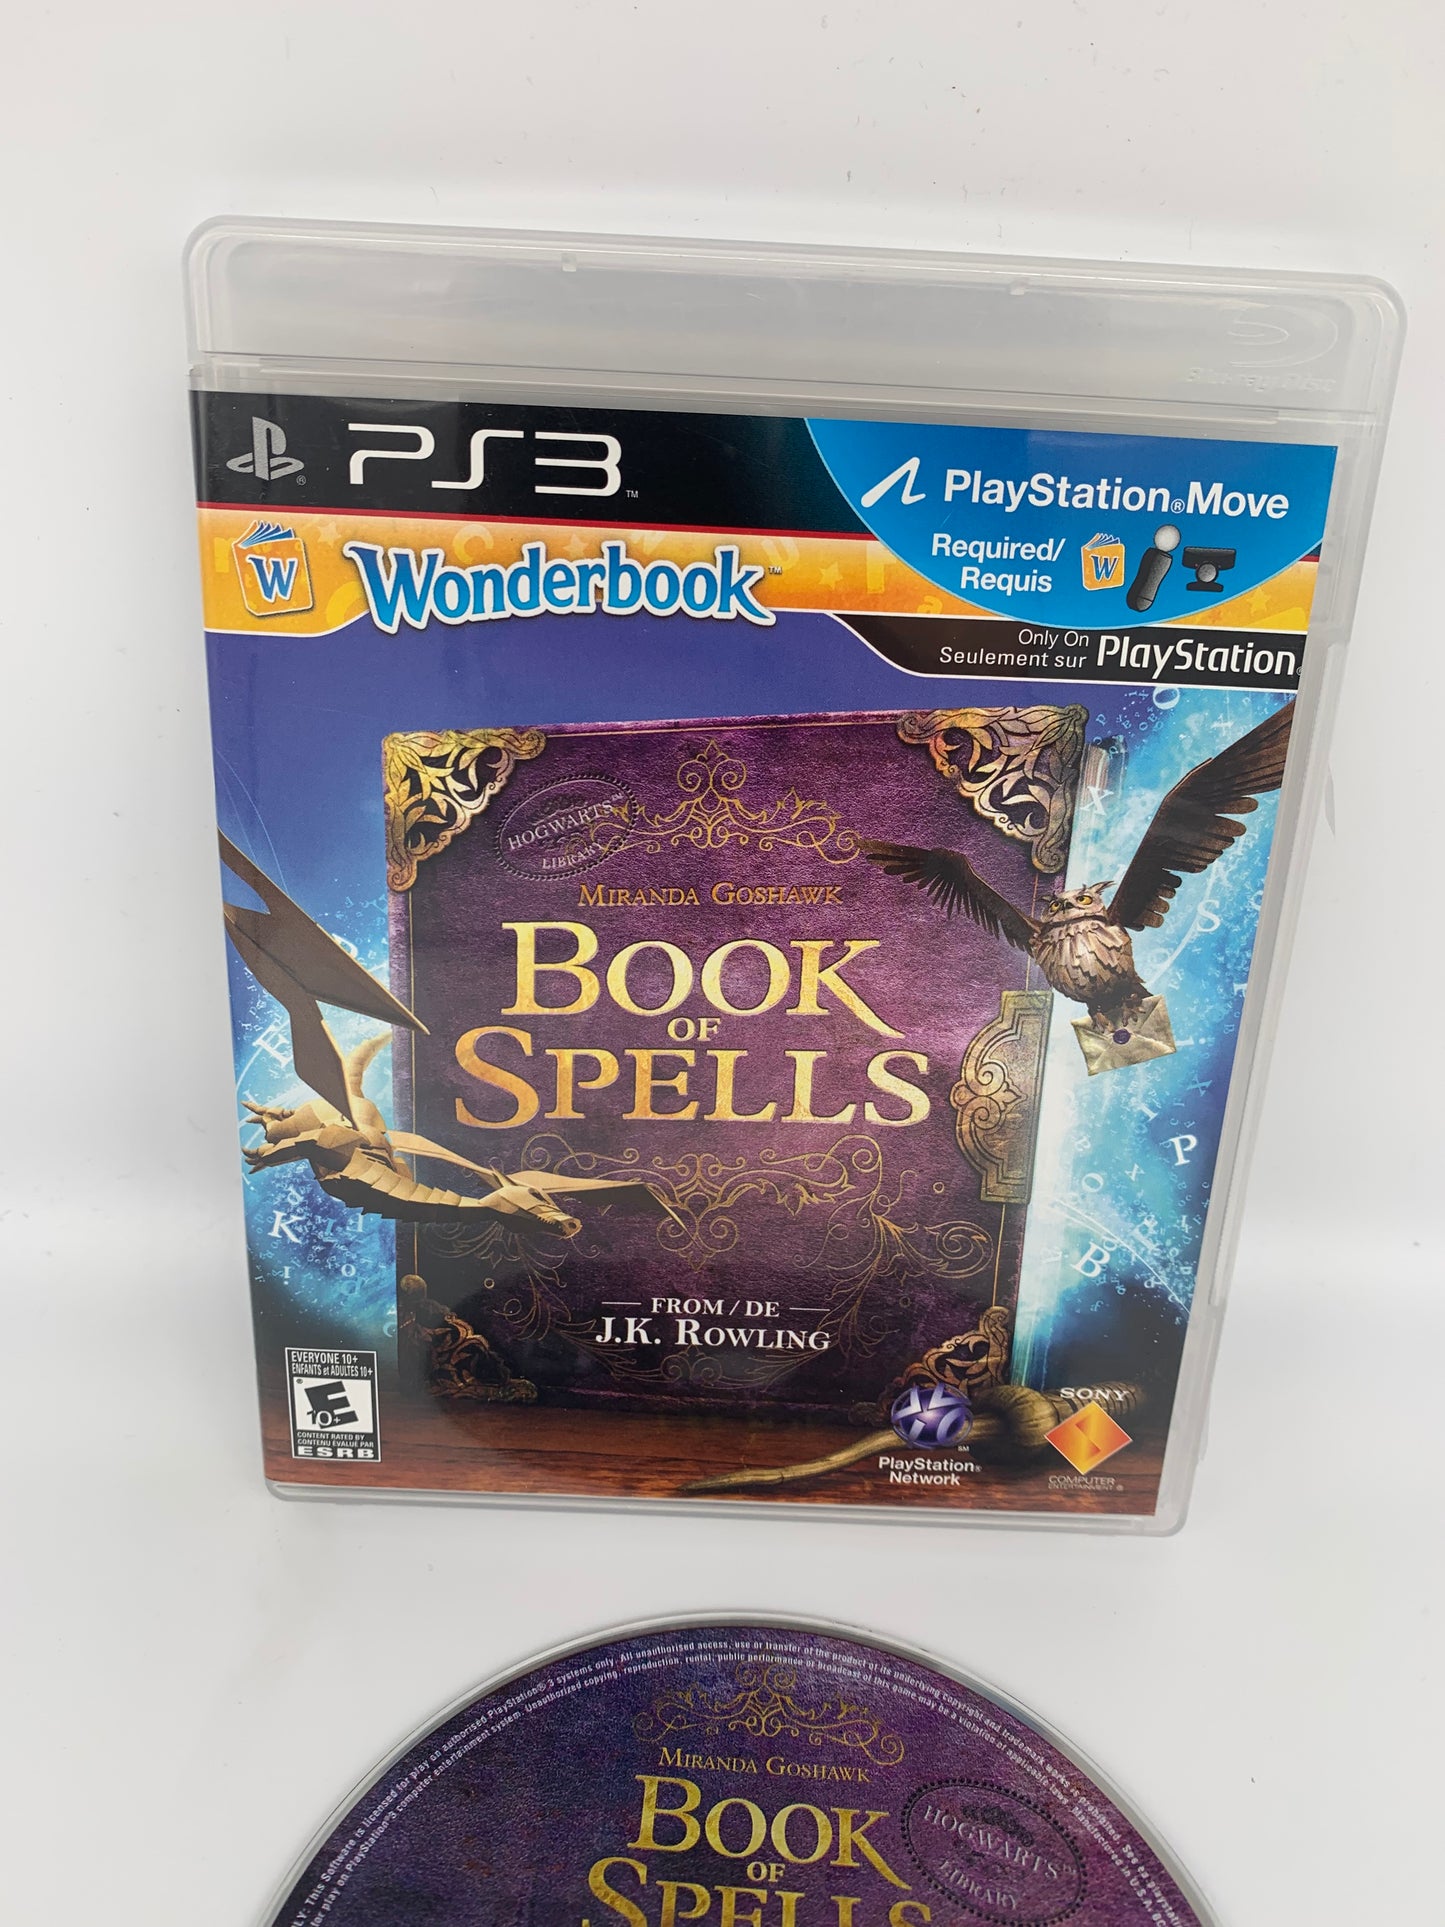 SONY PLAYSTATiON 3 [PS3] | WONDERBOOK BOOK OF SPELLS | NOT FOR RESALE